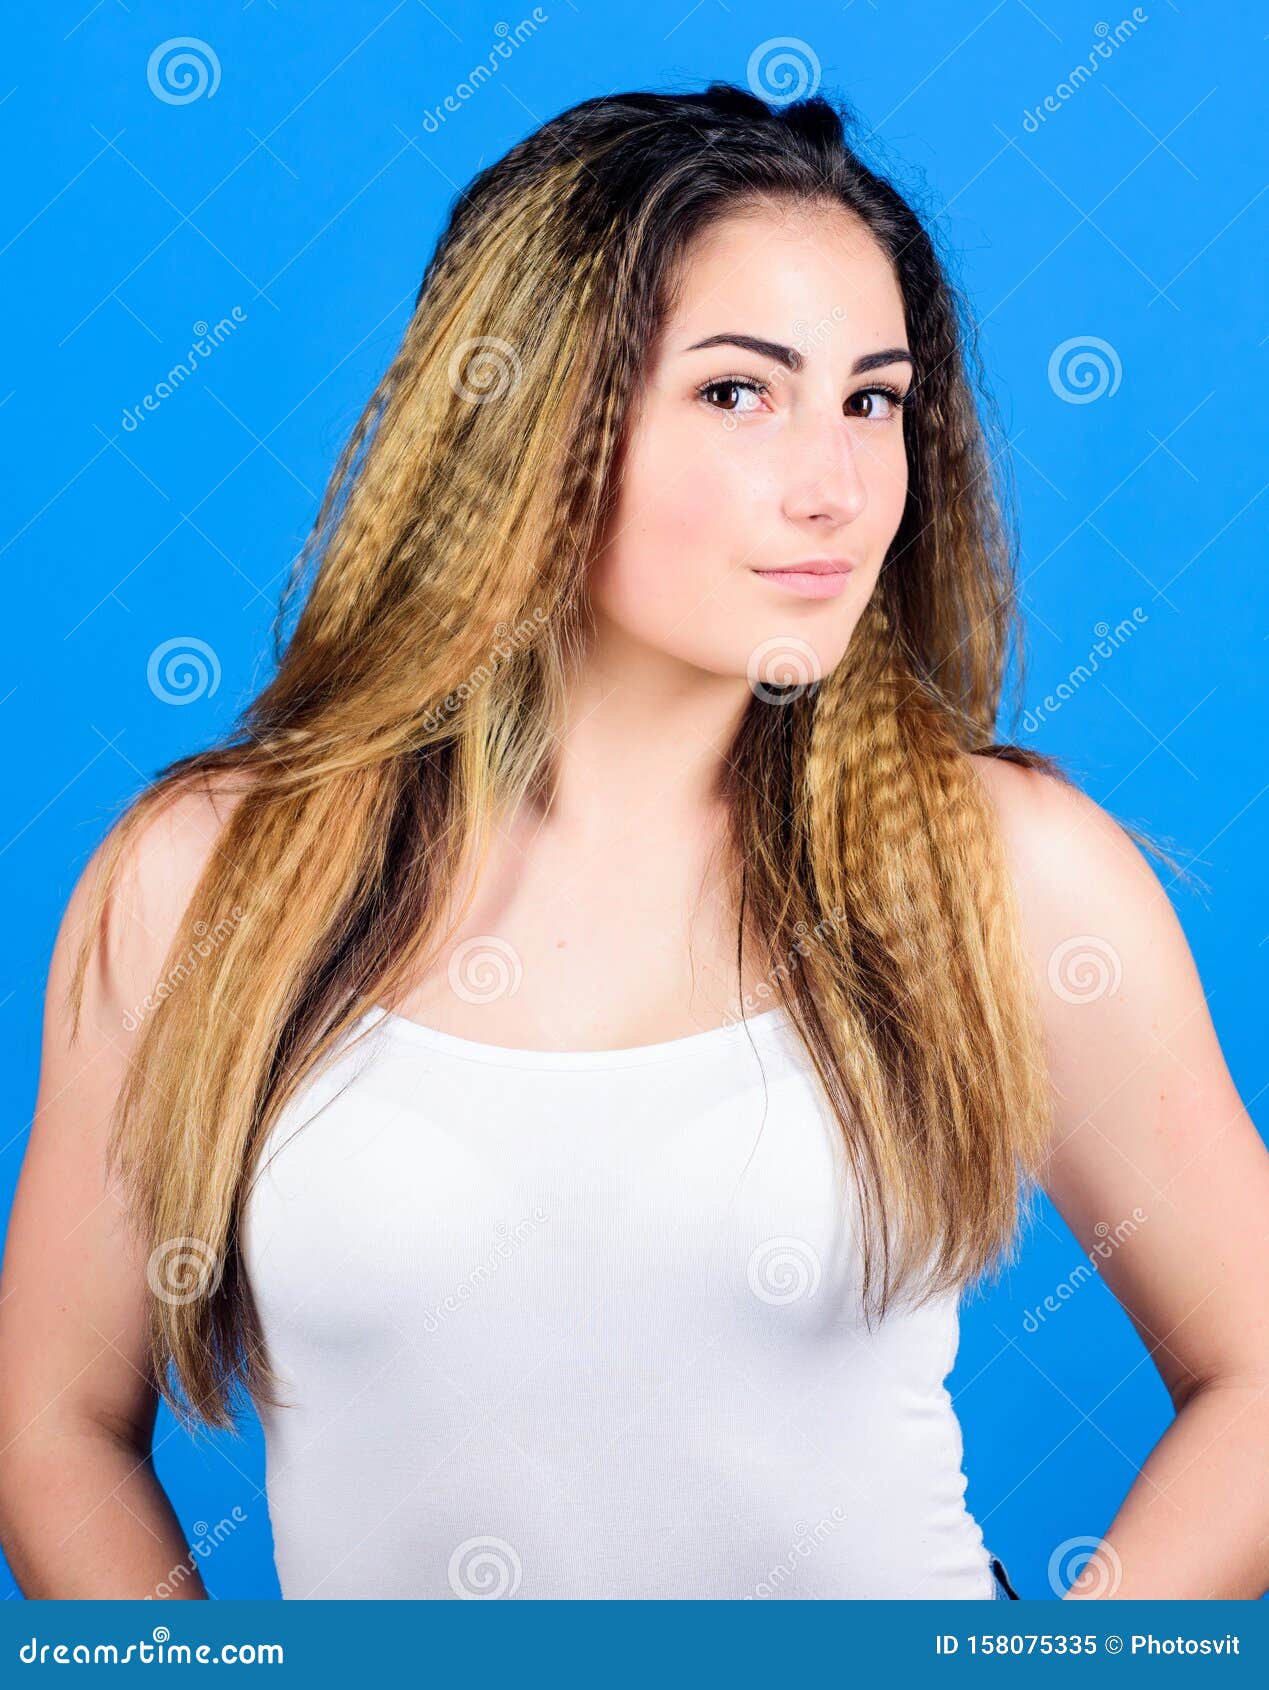 Hairdresser Salon. Damaged Hair. Voluminous Crimped Hair. Styling Cosmetic  Product. Crimped Hairstyles Stock Image - Image of hairstyle, pretty:  158075335